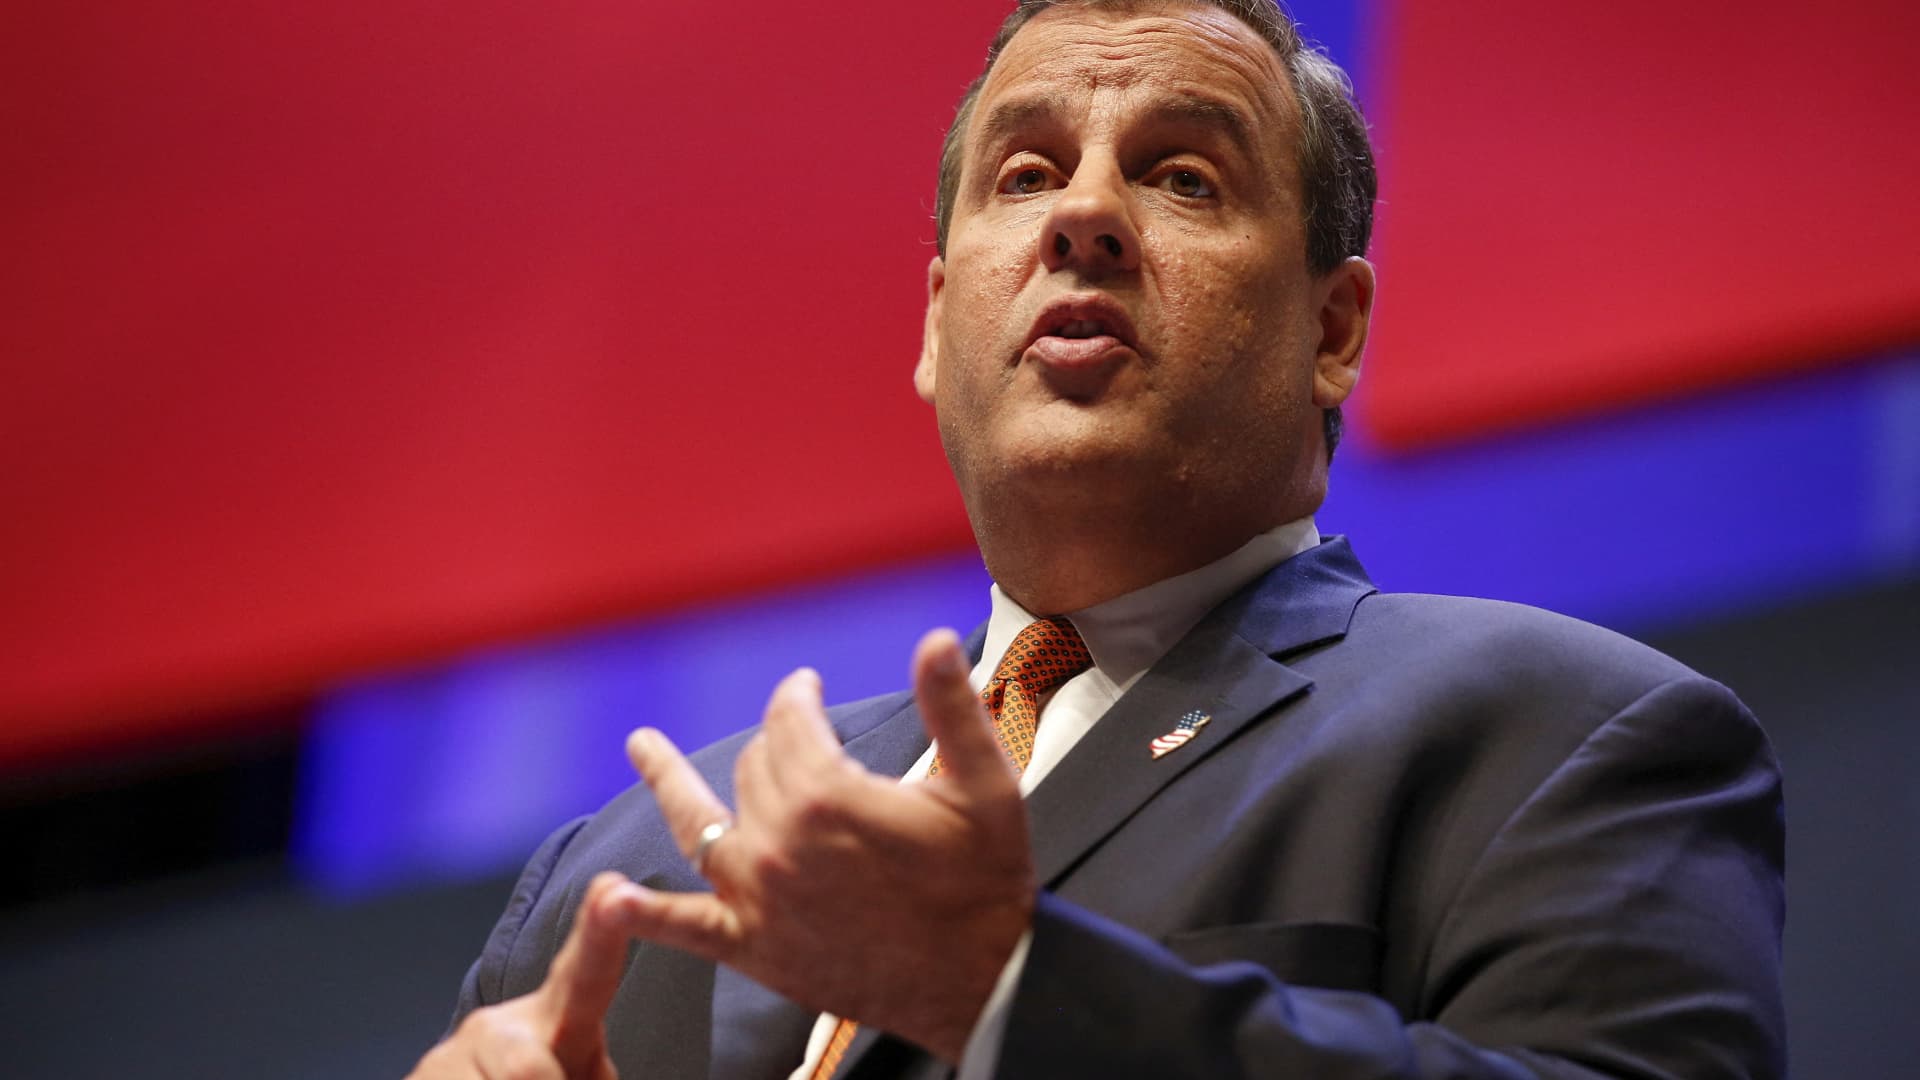 Former New Jersey Gov. Chris Christie, a top GOP Trump critic, files paperwork to launch 2024 presidential campaign